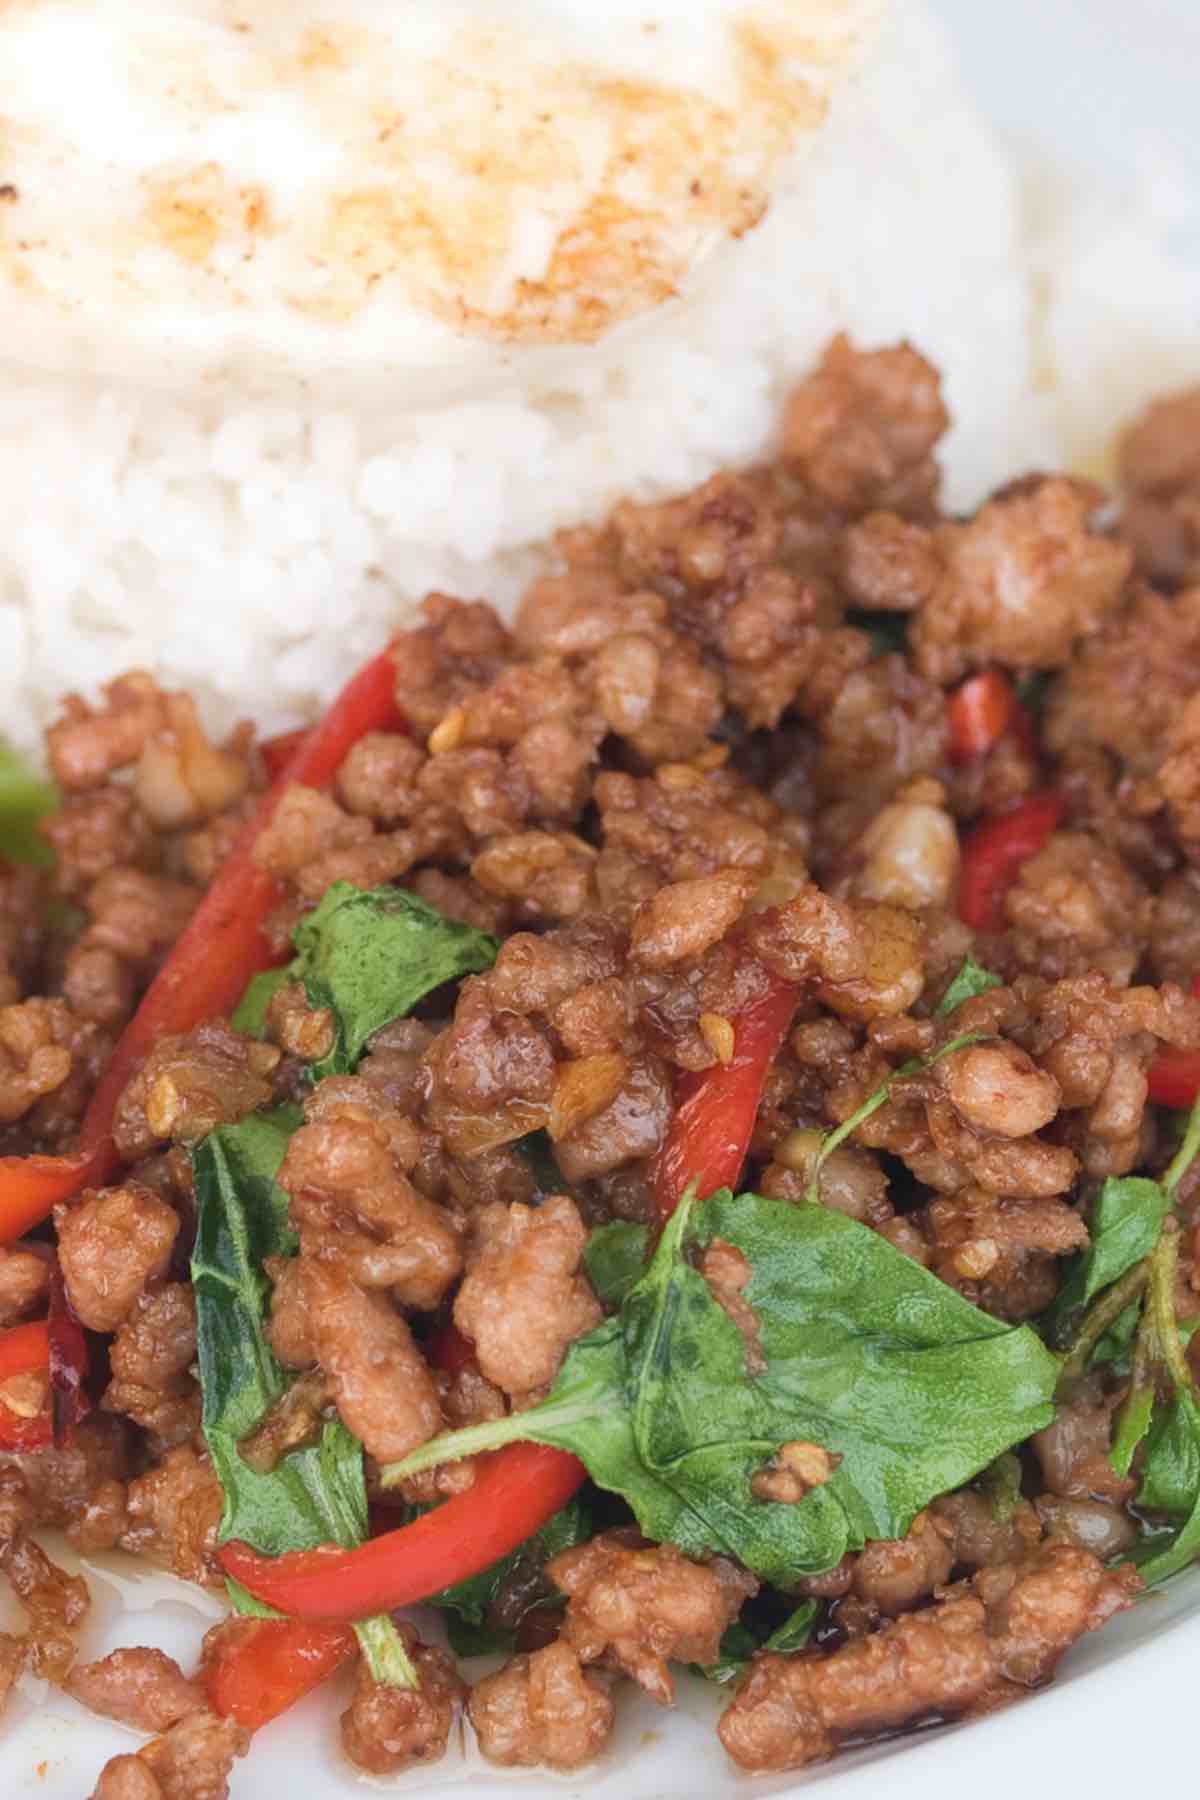 If you’ve got ground pork on hand, then you’ll want to bookmark these delicious ground pork recipes for easy dinners. From classics like ground pork sausages and meatballs to Asian favorites like pork buns and spring rolls, these are the recipes you’ll find yourself making again and again.